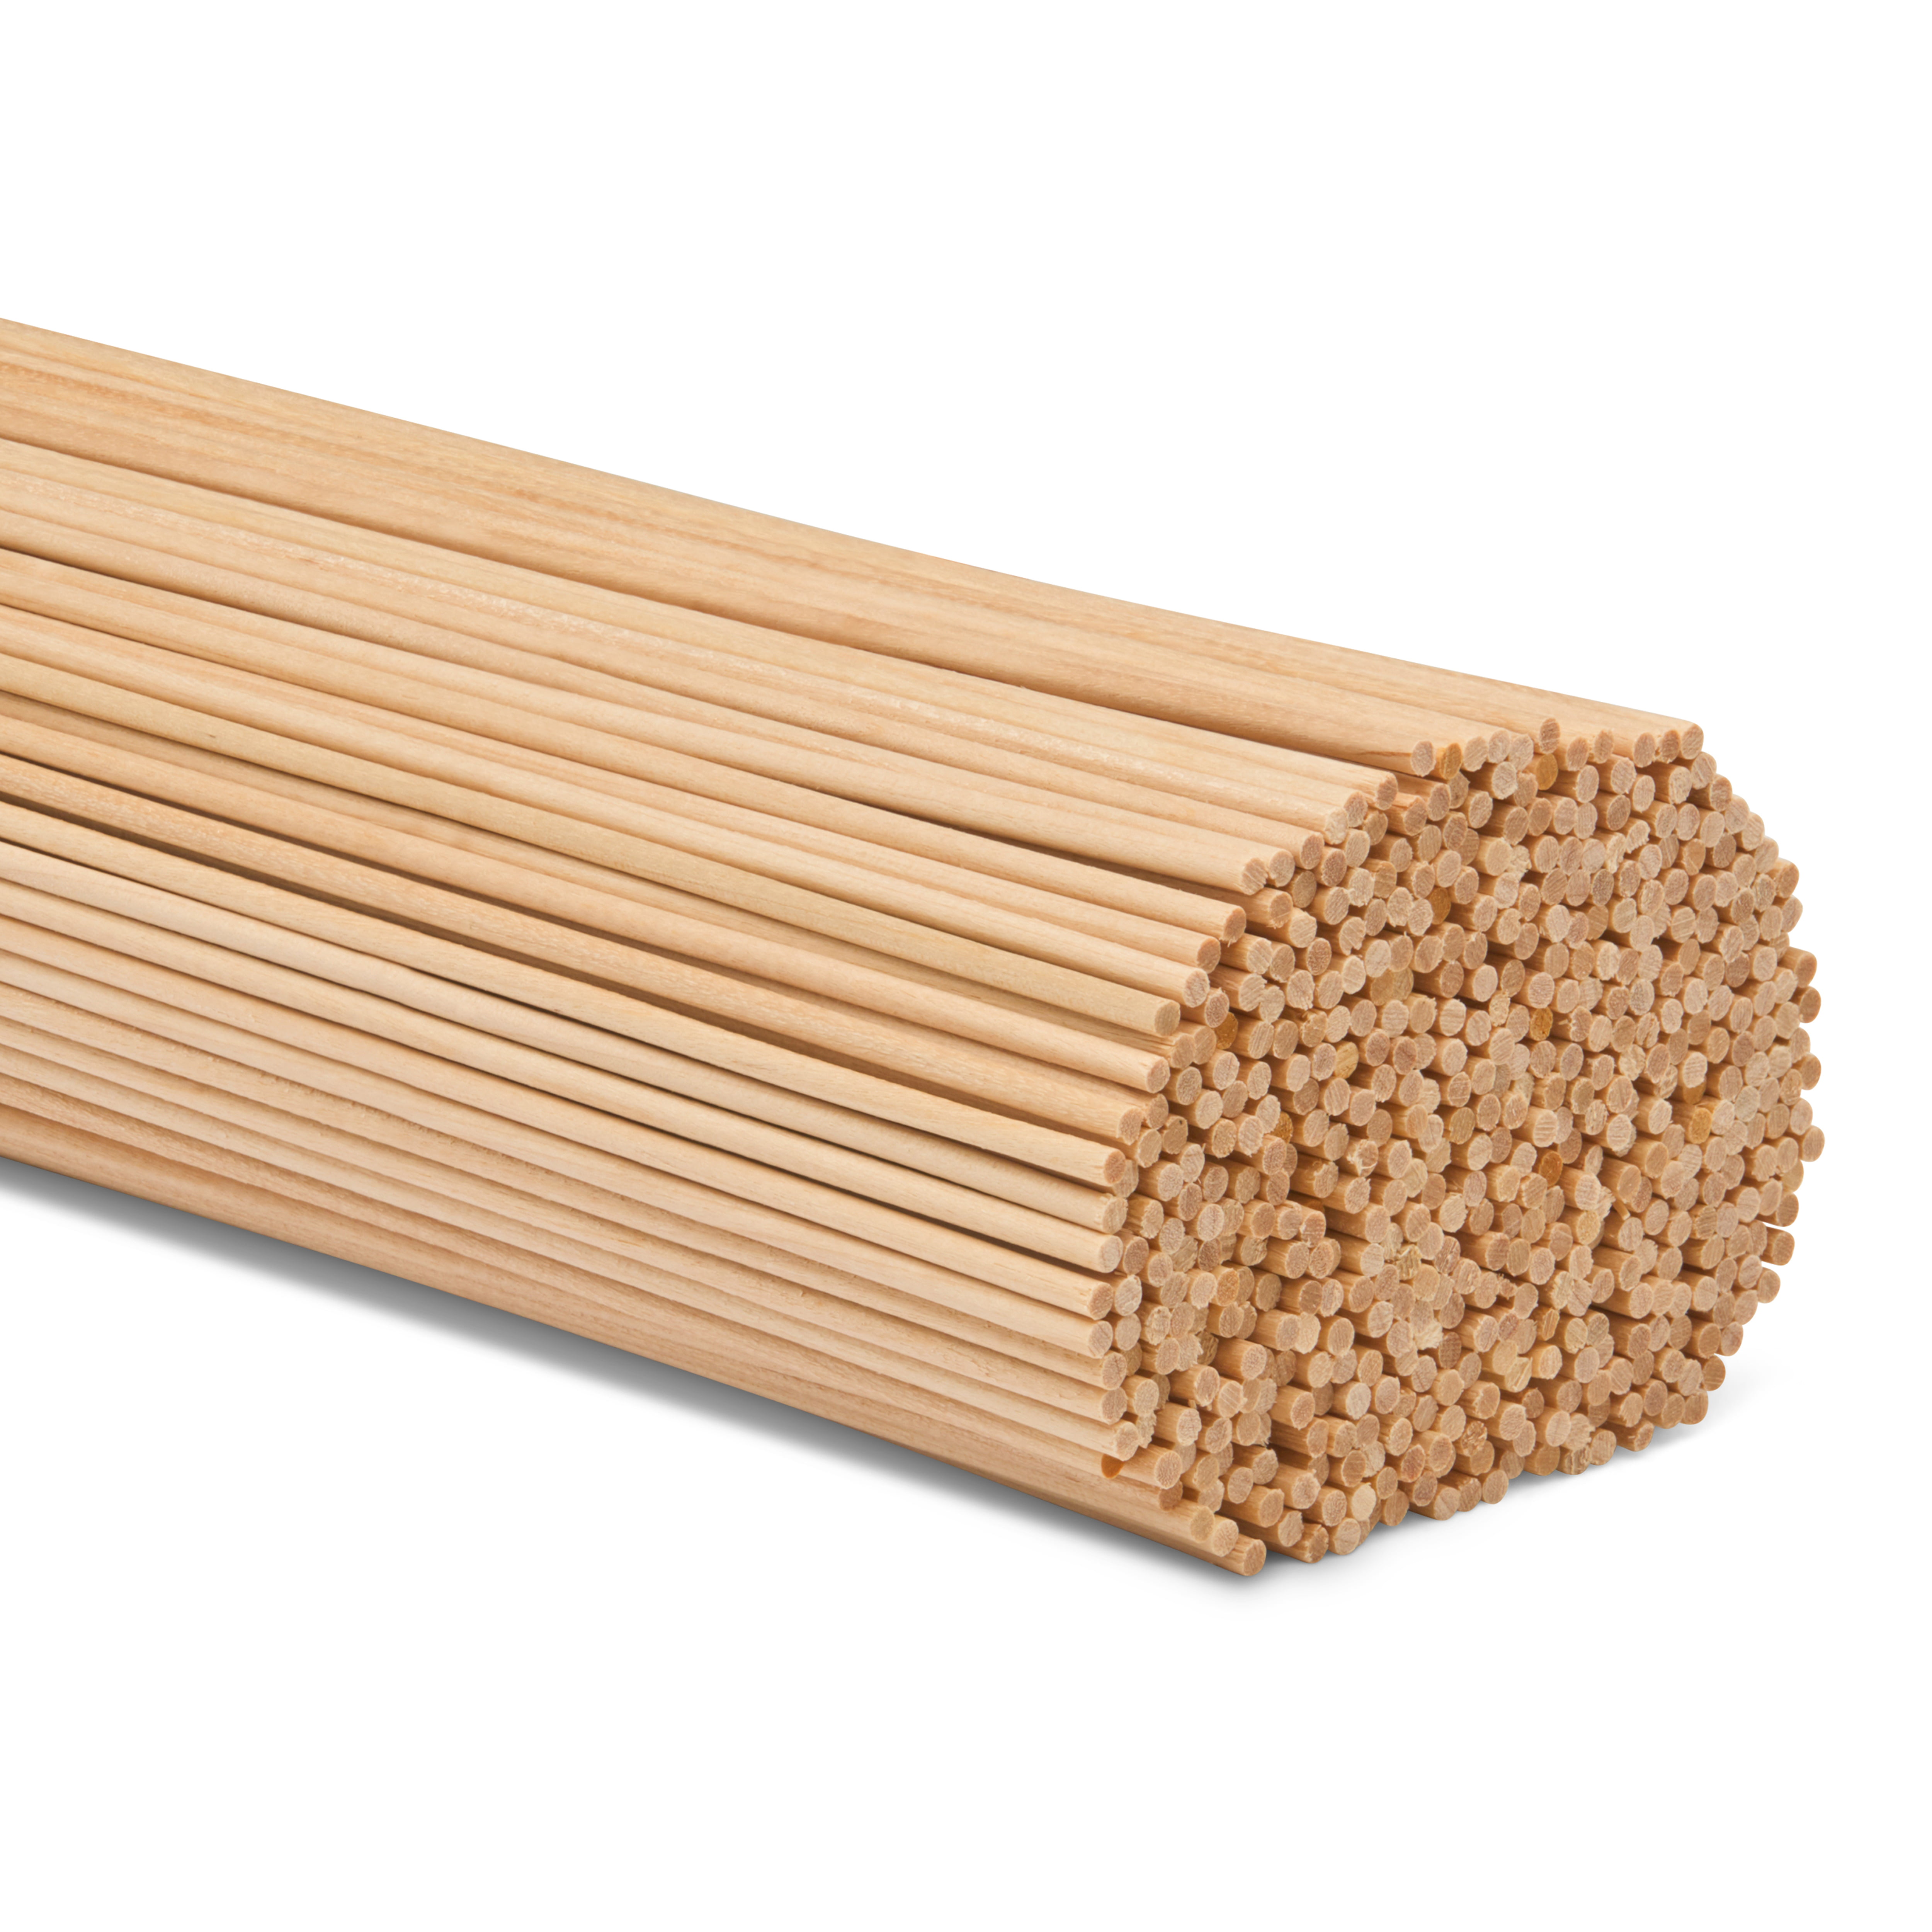 Dowel Rods Wood Sticks Wooden Dowel Rods for Crafts and DIYers 500Pieces by Woodpeckers 5/16 x 12 Inch Unfinished Hardwood Sticks 